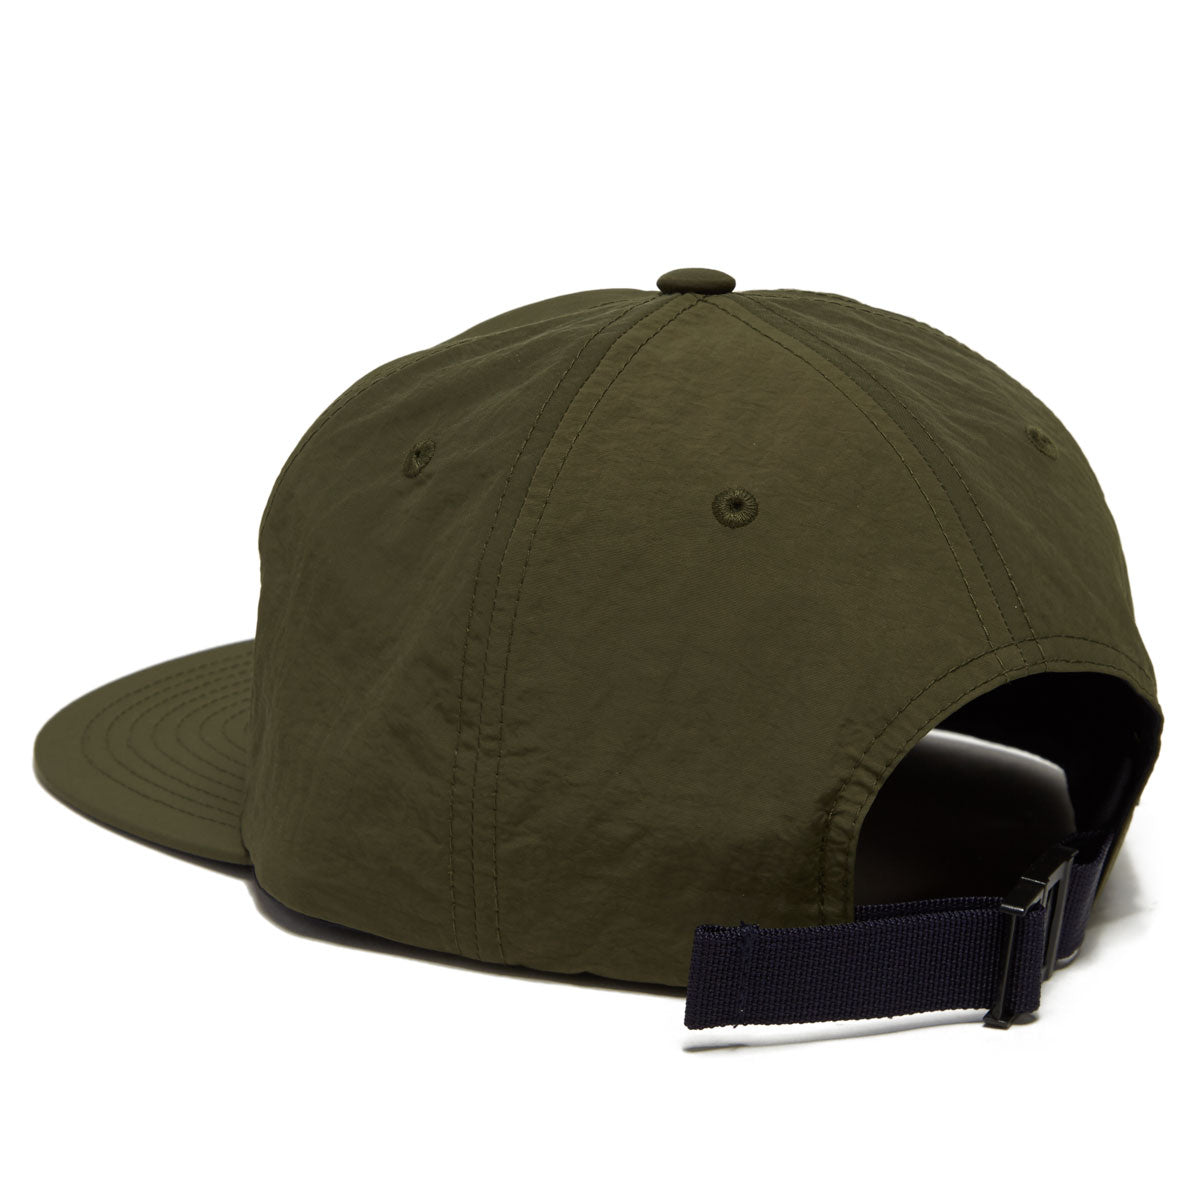 Salty Crew Clubhouse 5 Panel Hat - Olive image 2